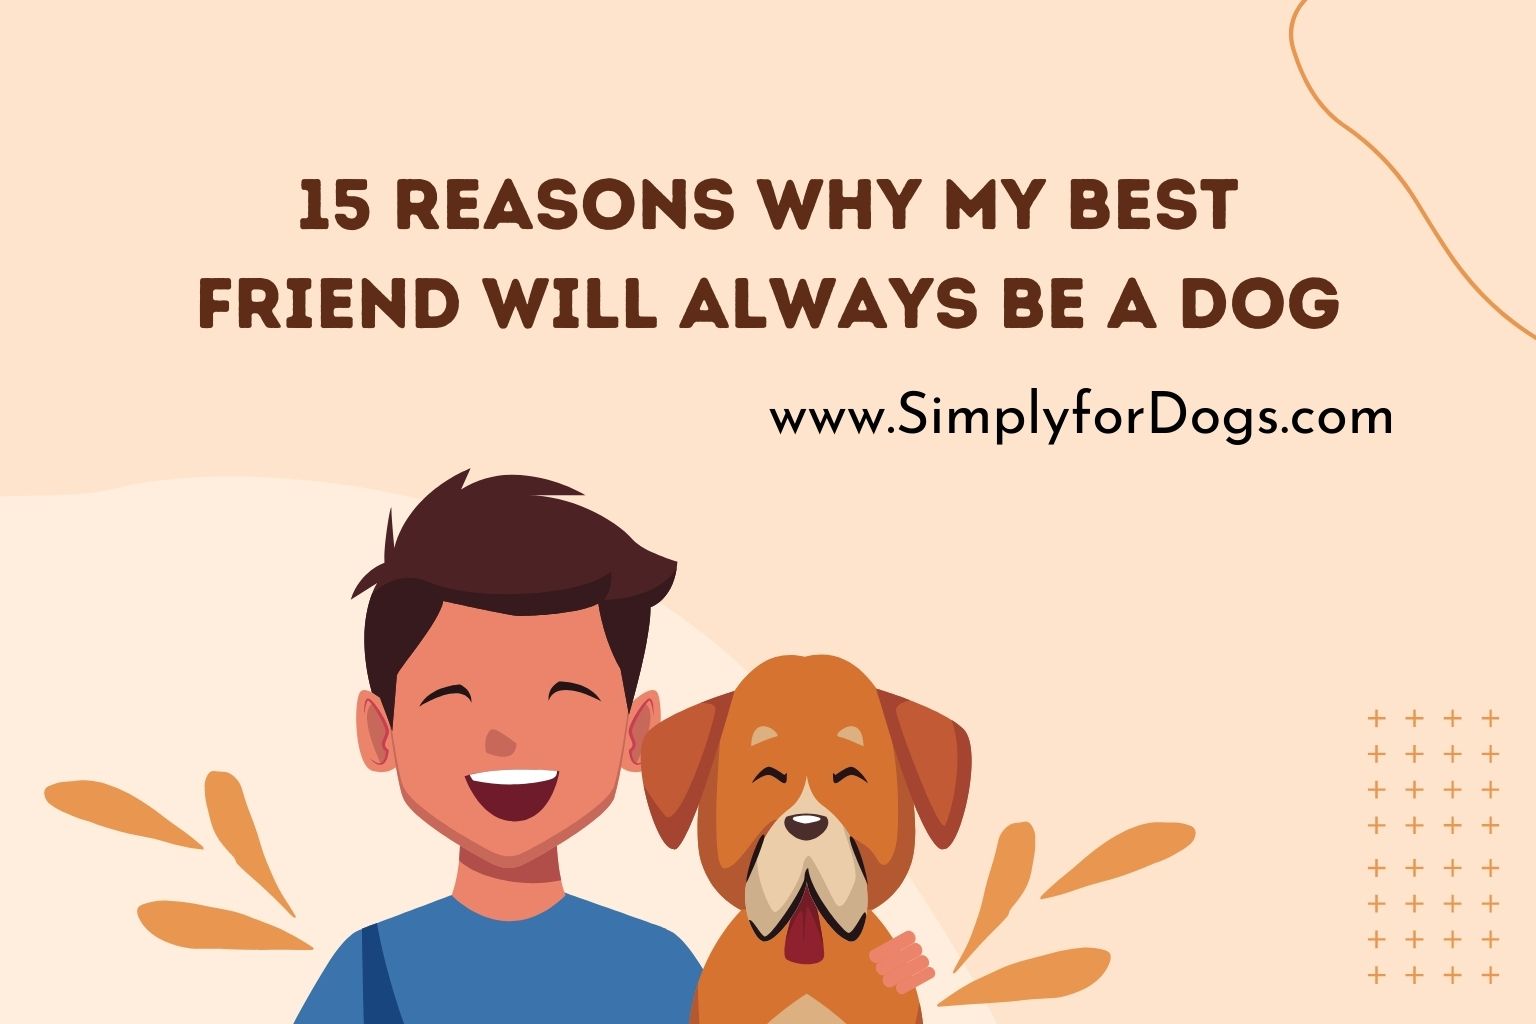 15 Reasons Why My Best Friend Will Always Be a Dog